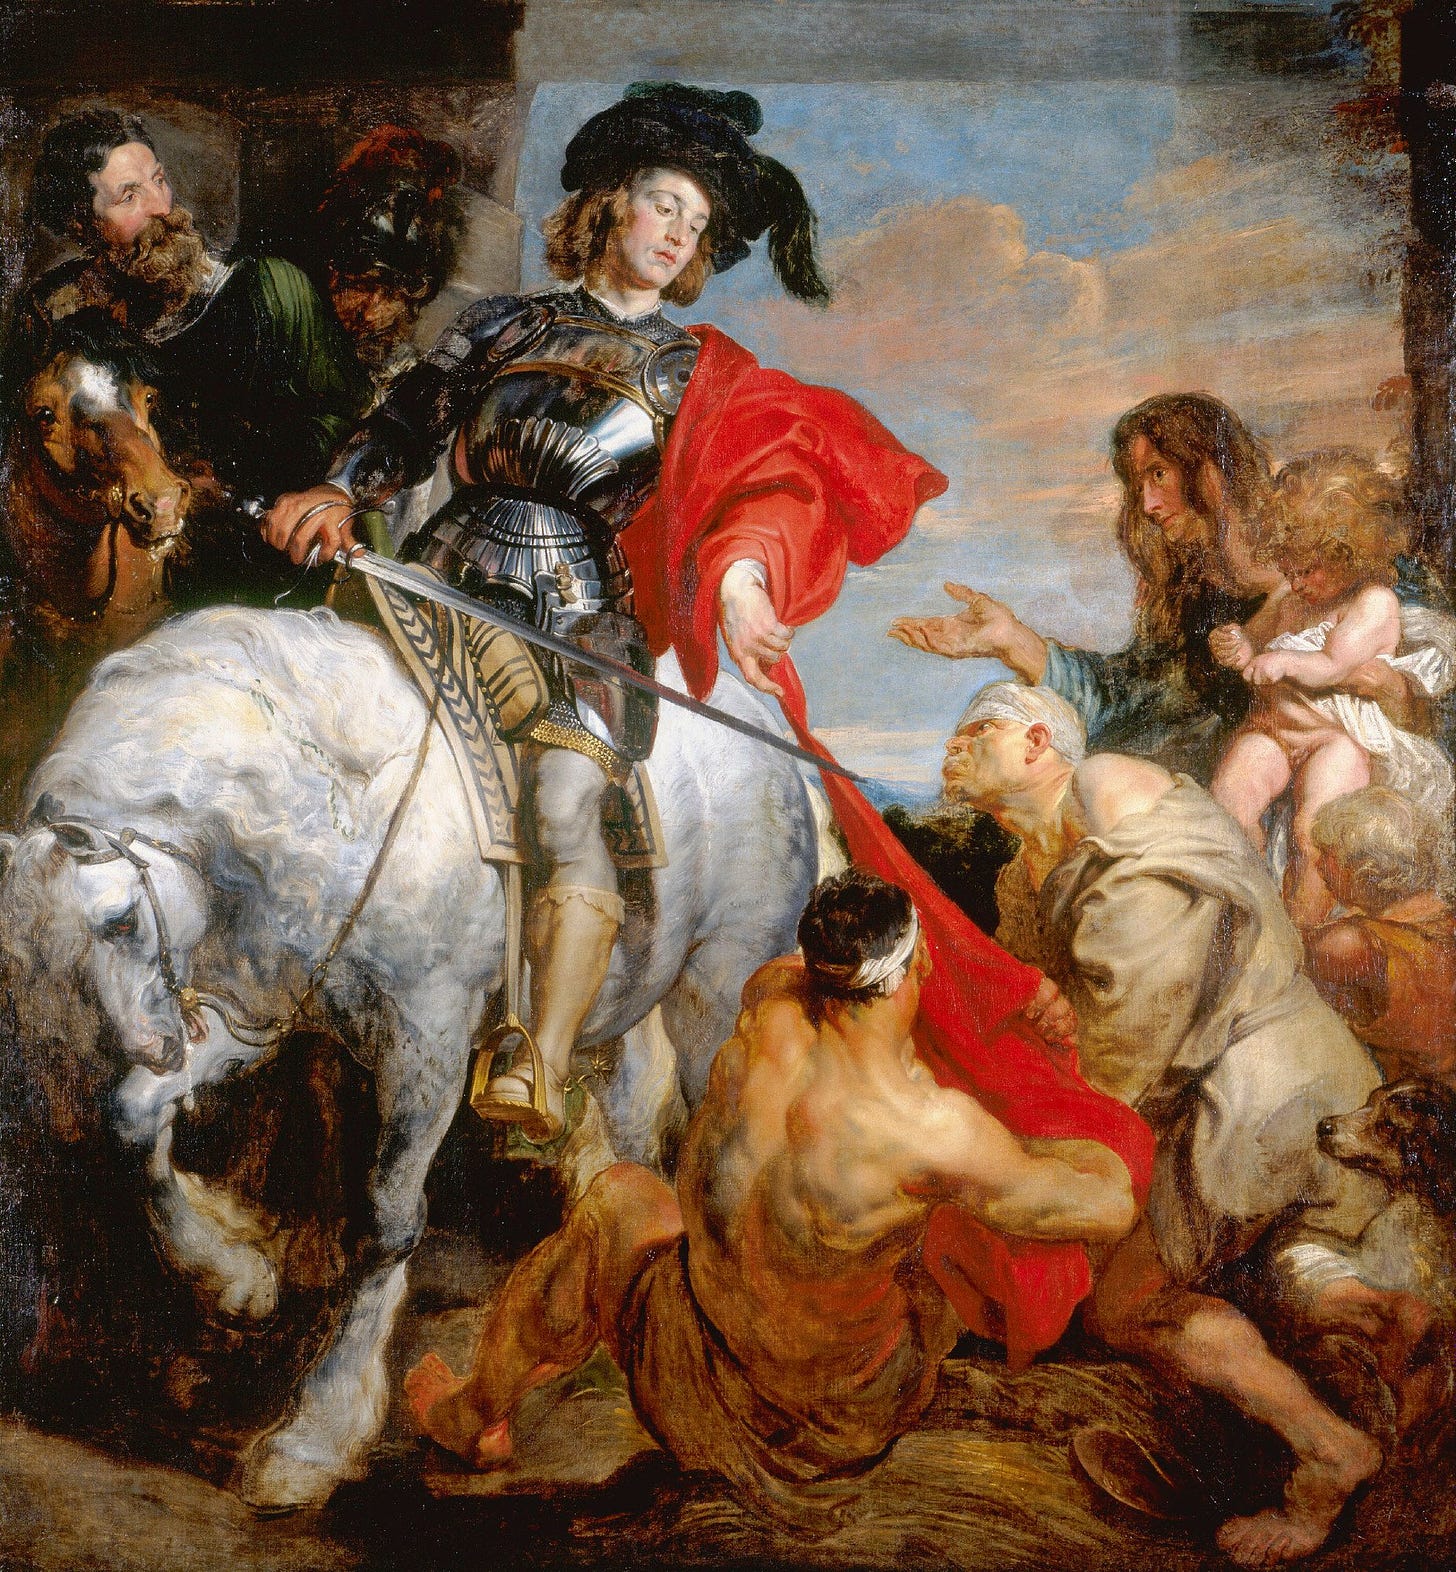 Martin in armor on horseback, slicing a red cloak in two to give to a beggar at the roadside